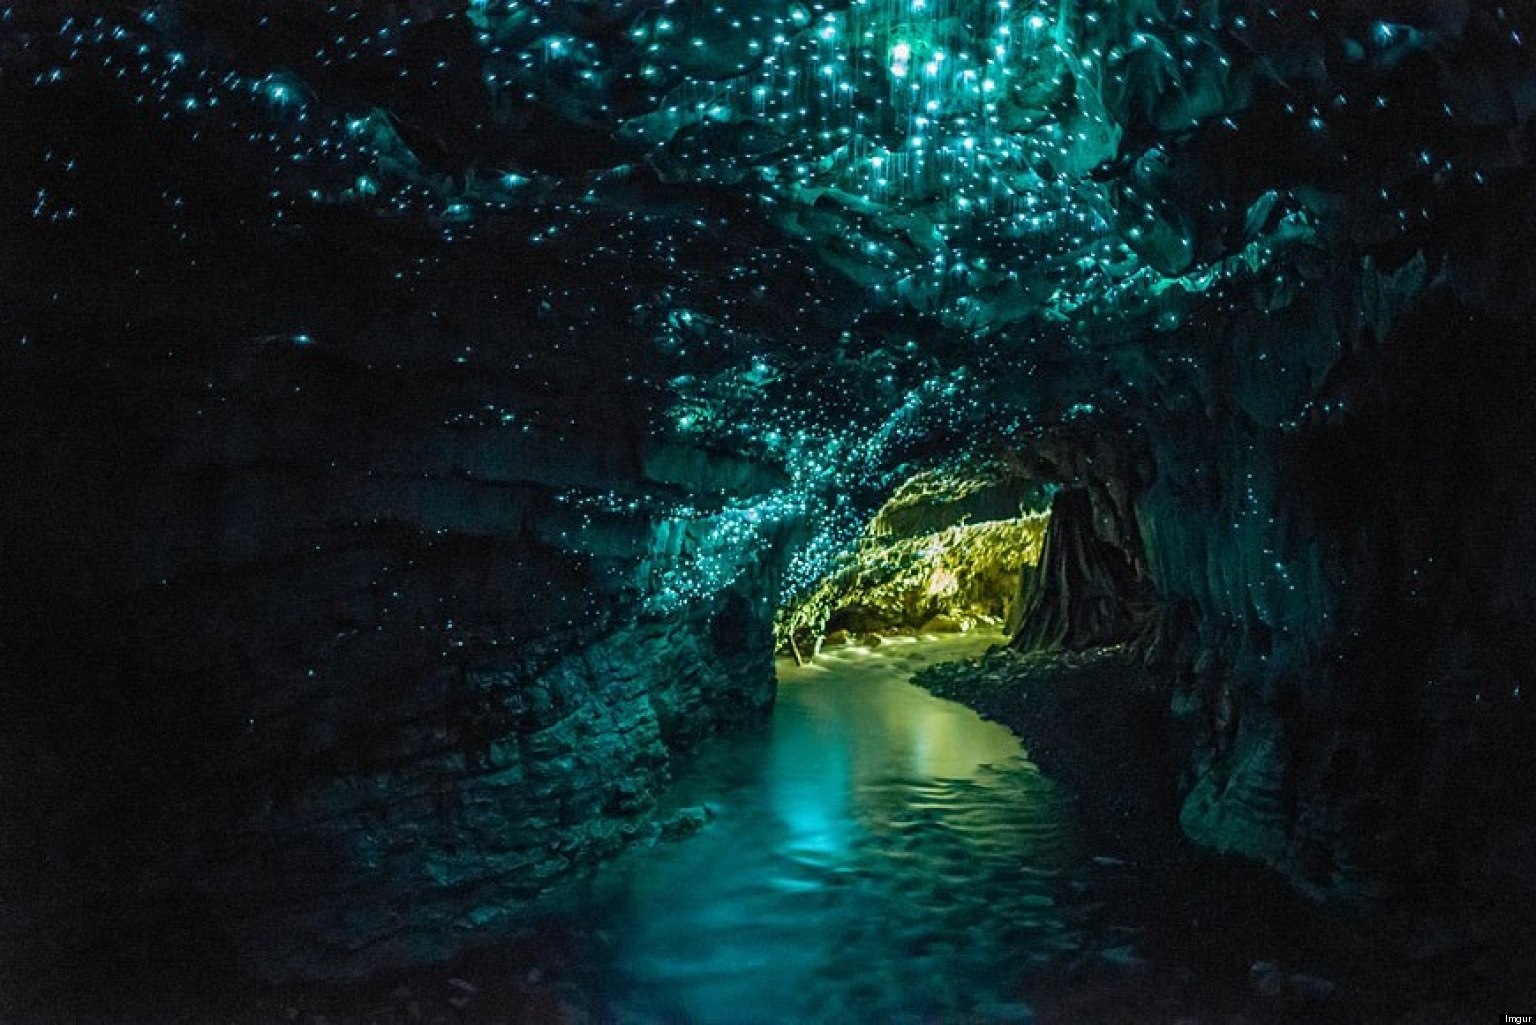 Waitomo Glowworm Cave New Zealand- Formed over 30 million years ago, this cave is one of the most brilliant displays of bioluminescence on Earth. Thousands of glowworms, which are native to New Zealand, hang from the walls of the cave from strands of silk and use their dazzling blue light to attract prey.